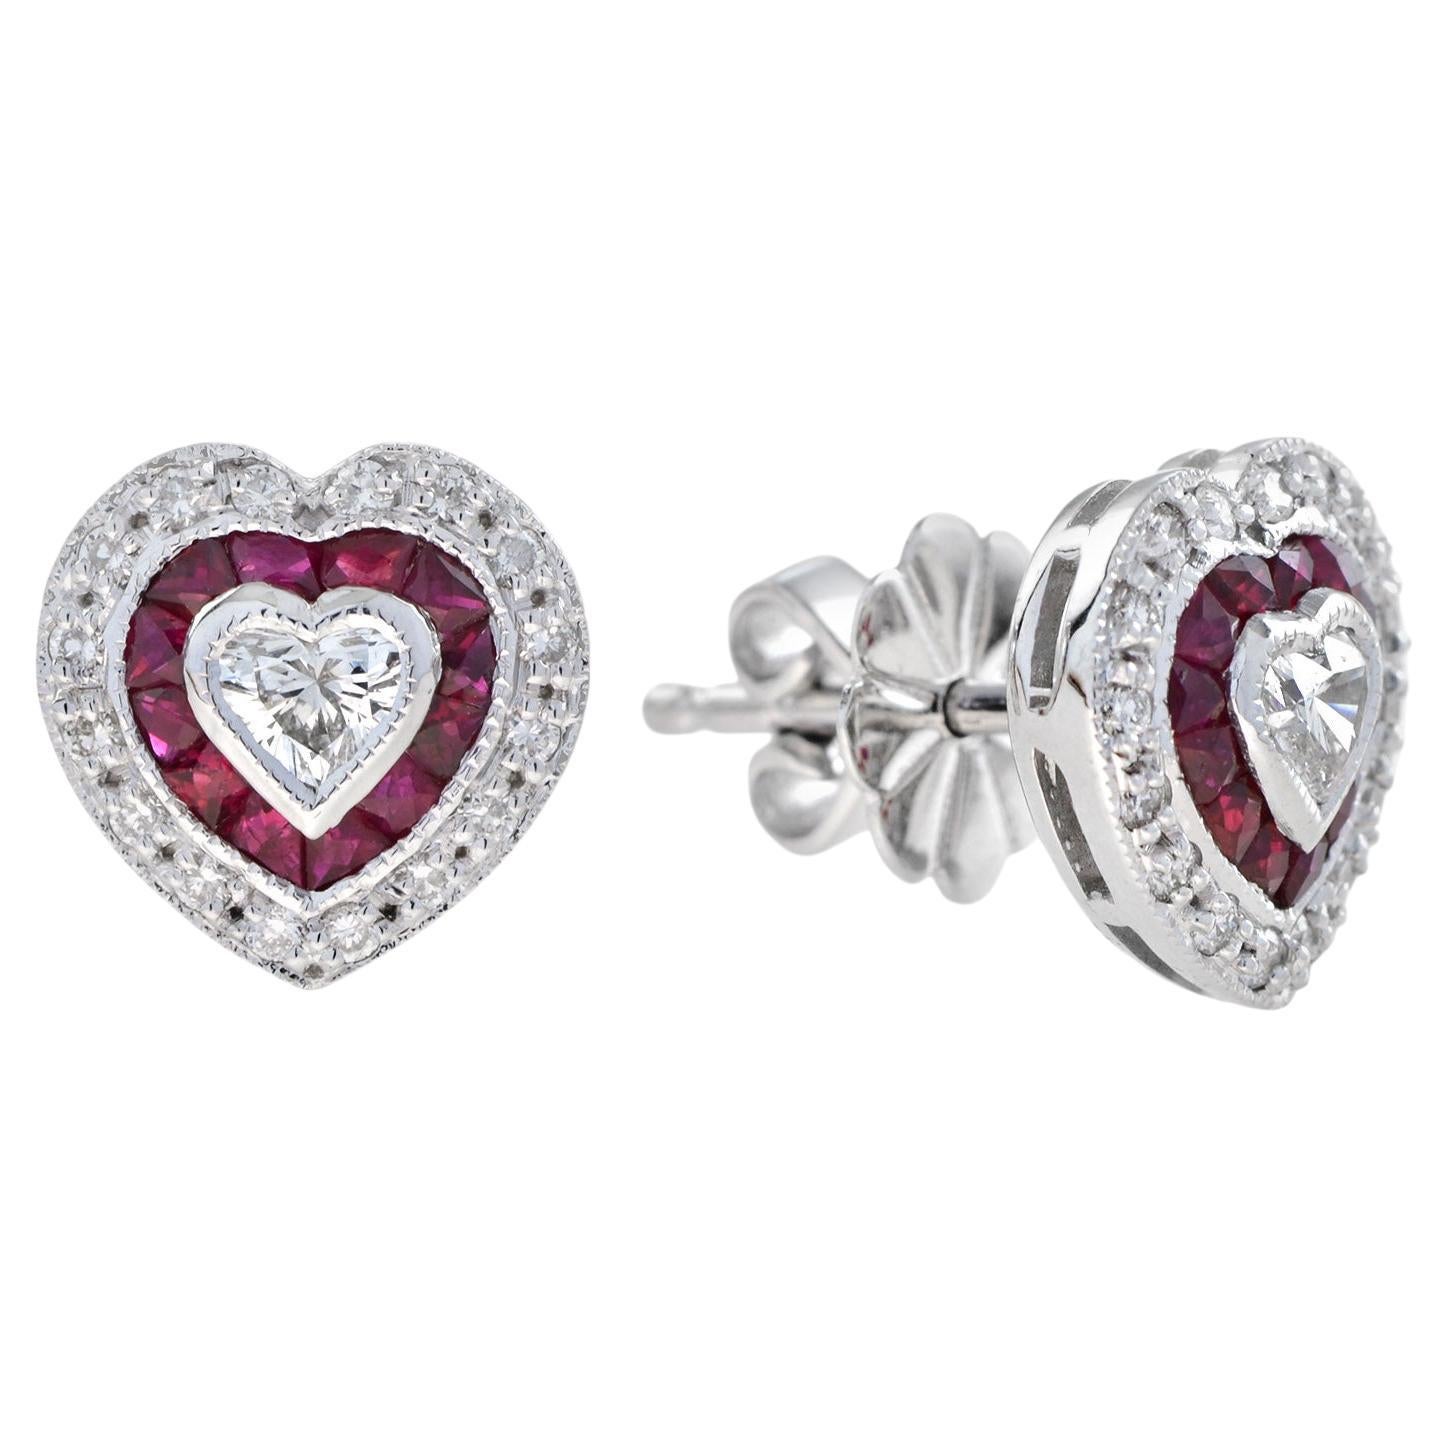 Heart Shaped Diamond and Ruby Art Deco Style Stud Earrings in 14K White Gold For Sale